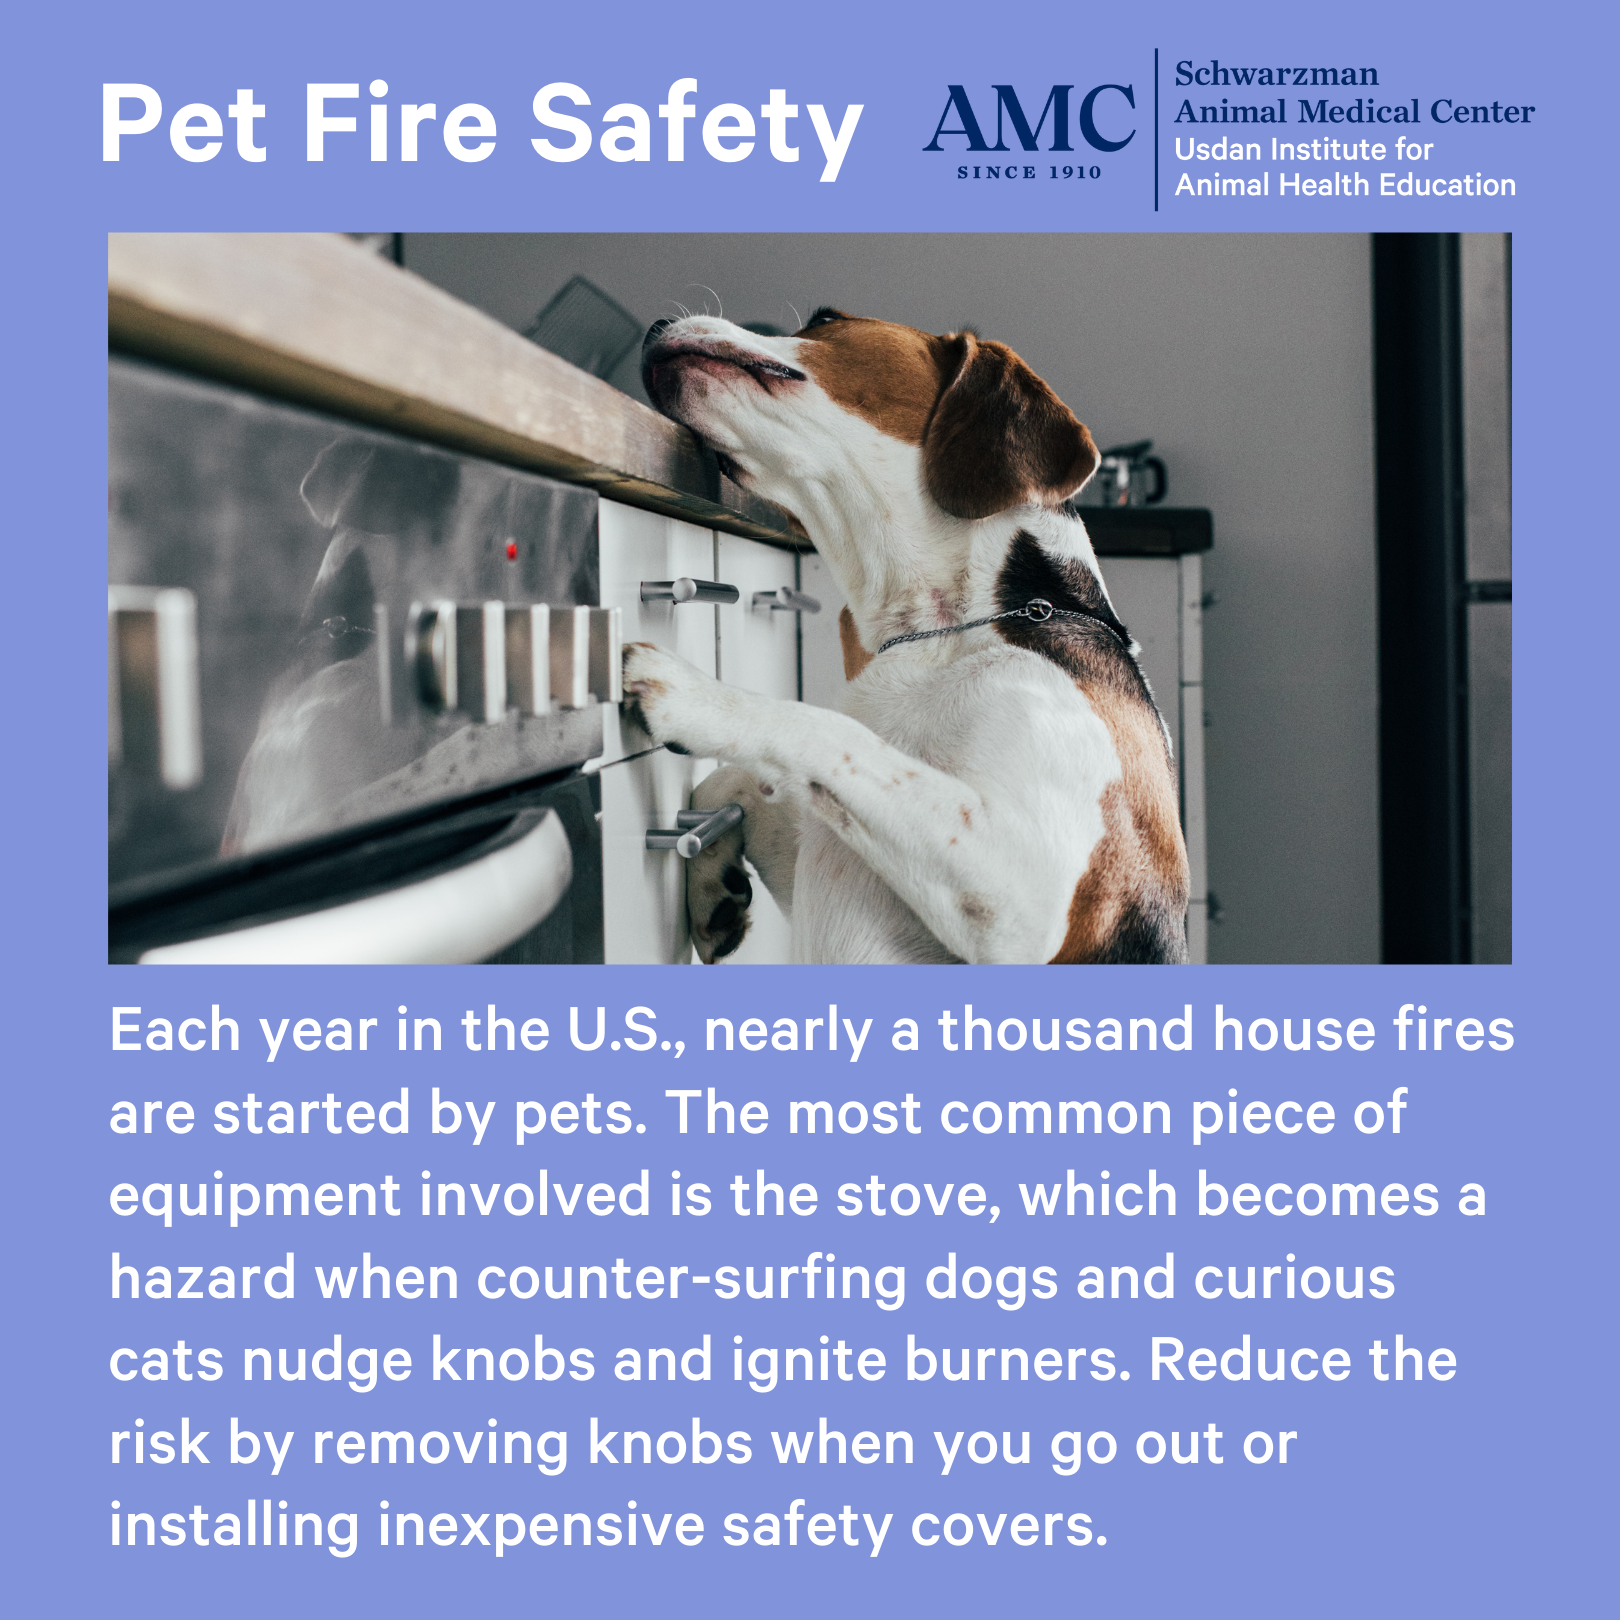 Pet Fire Safety. Each year in the U.S., nearly a thousand house fires are started by pets. The most common piece of equipment involved is the stove, which becomes a hazard when counter-surfing dogs and curious cats nudge knobs and ignite burners. Reduce the risk by removing knobs when you go out or installing inexpensive safety covers. 